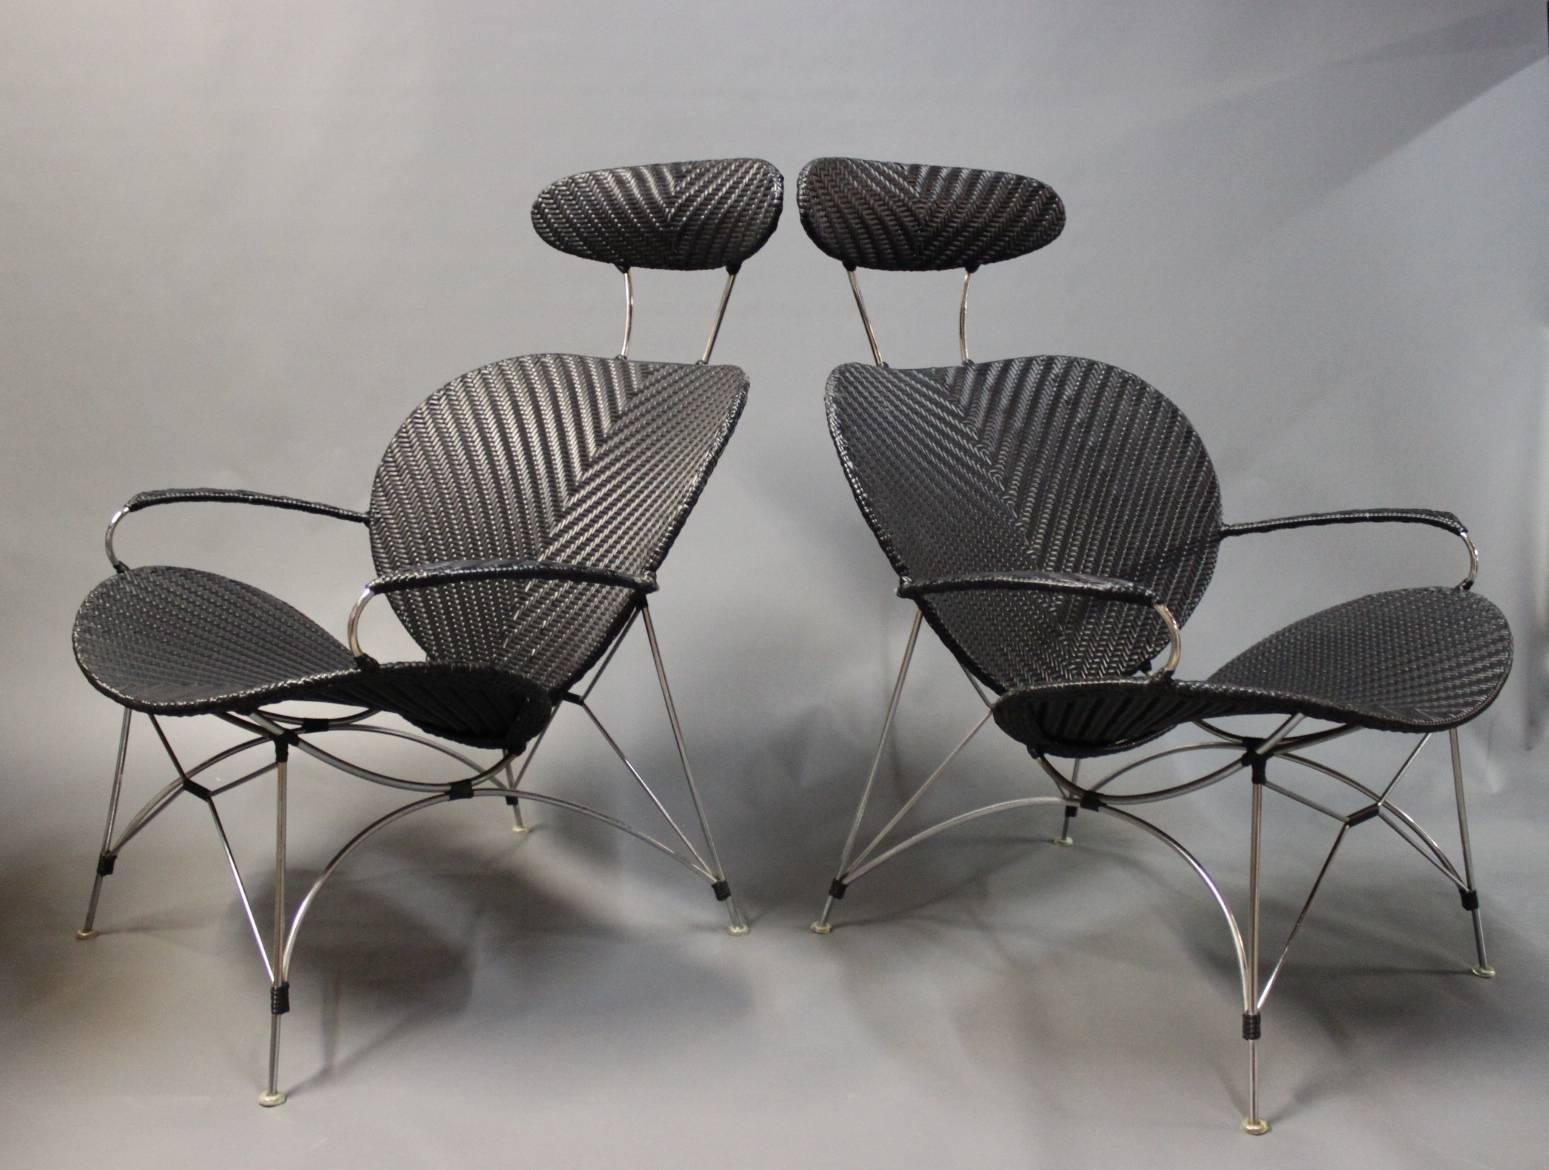 A pair of black lounge chairs by Yamakawa Contemporary Rattan with the serial no. 01-31330. The chairs are in black plait and frame of metal and from the 1980s.